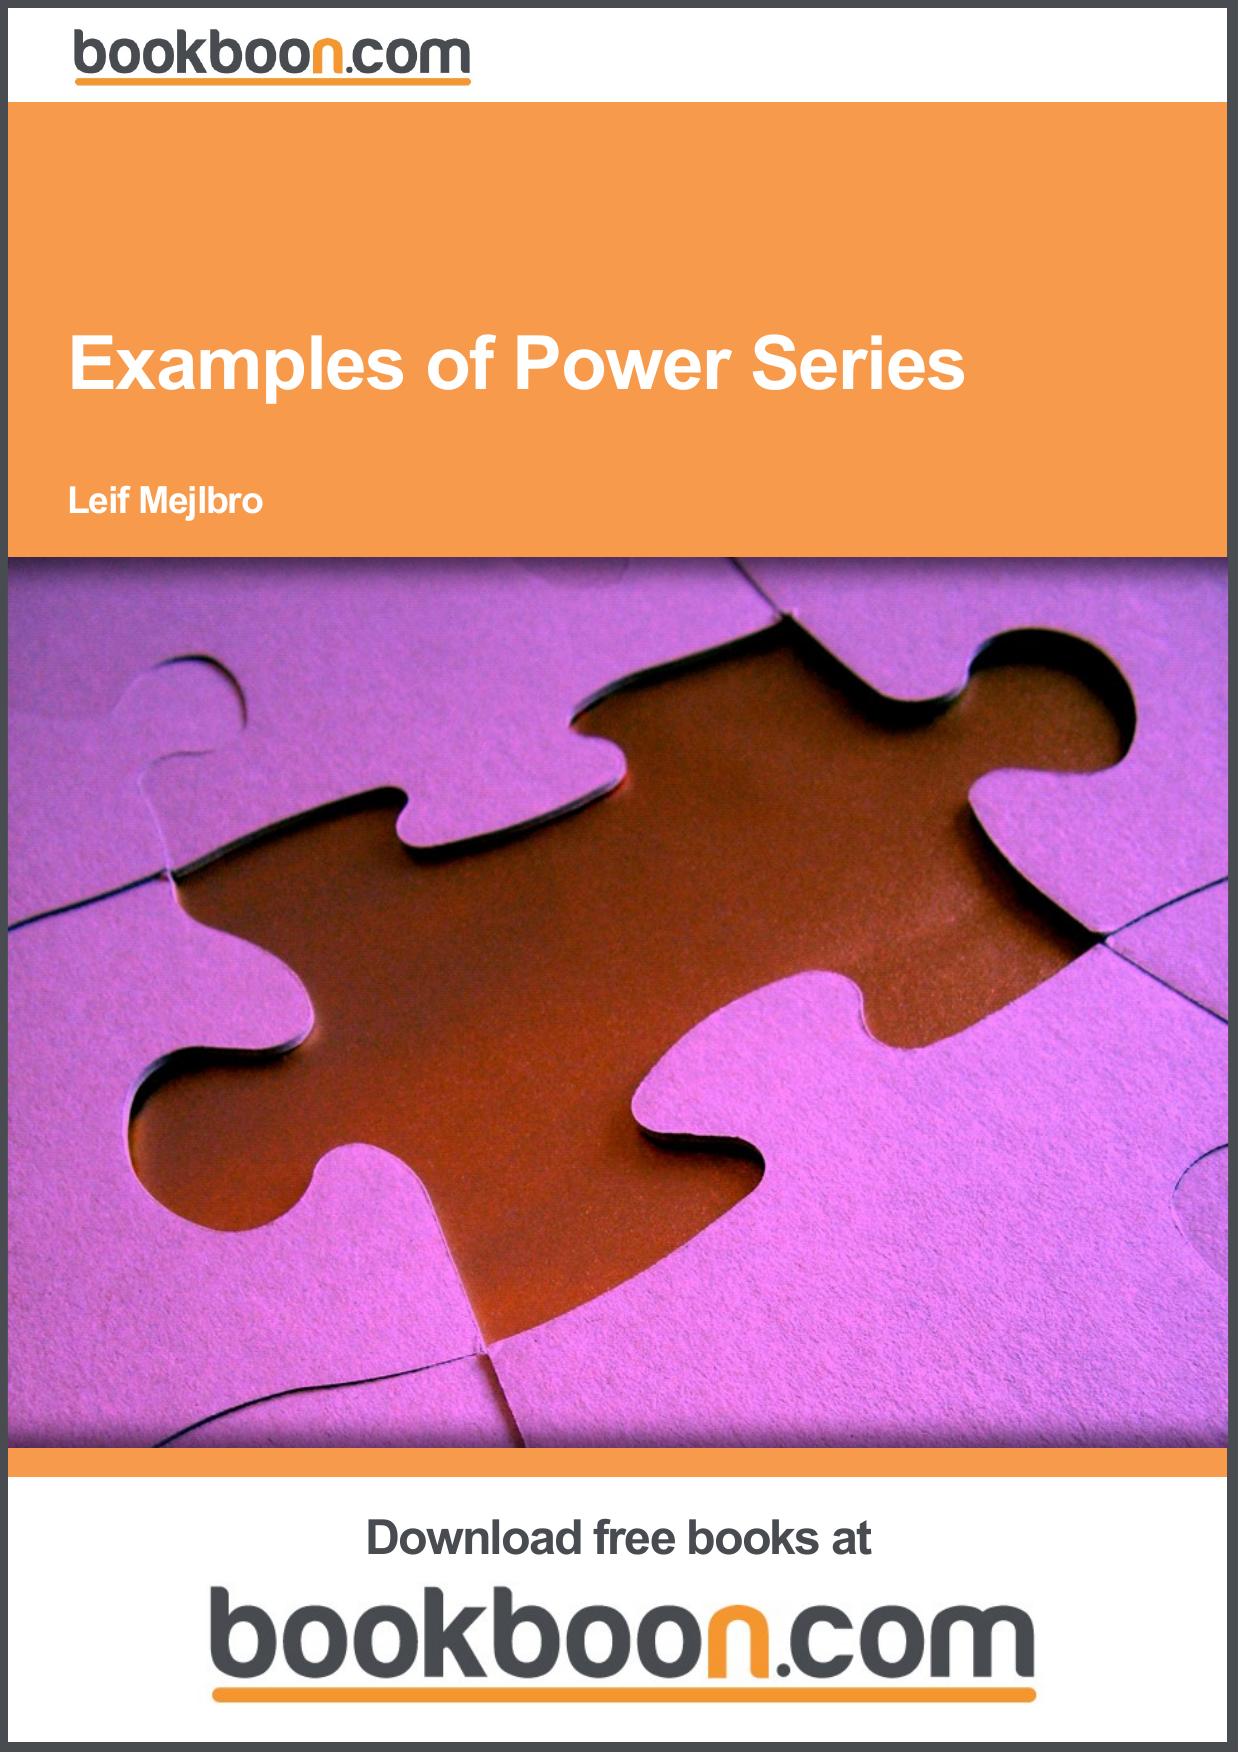 Examples of Power Series